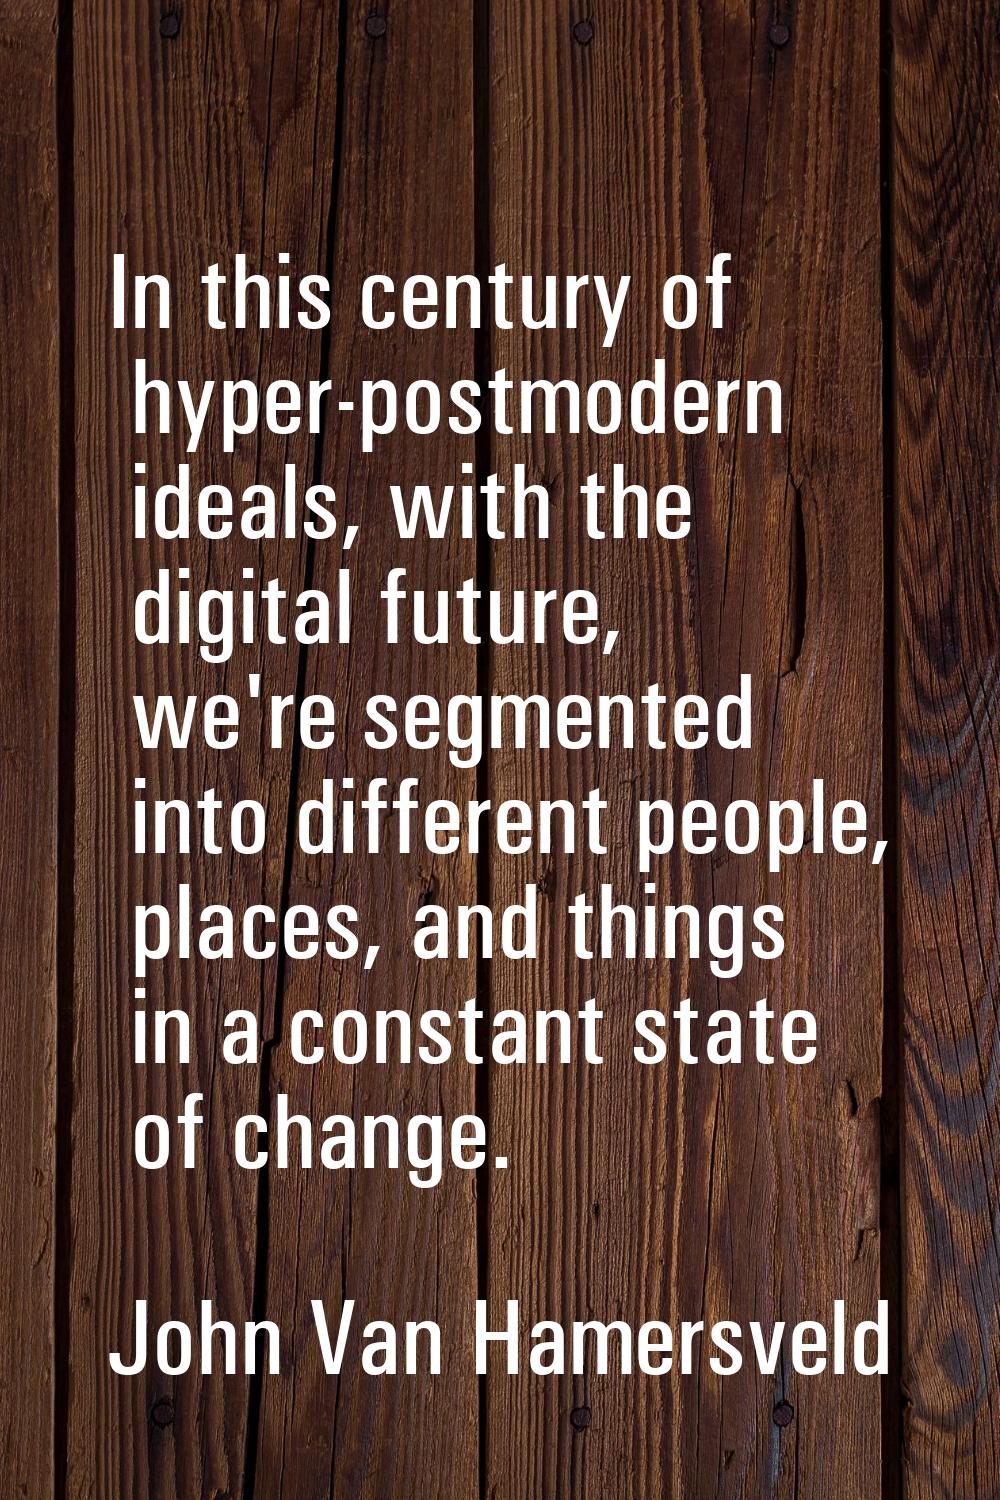 In this century of hyper-postmodern ideals, with the digital future, we're segmented into different